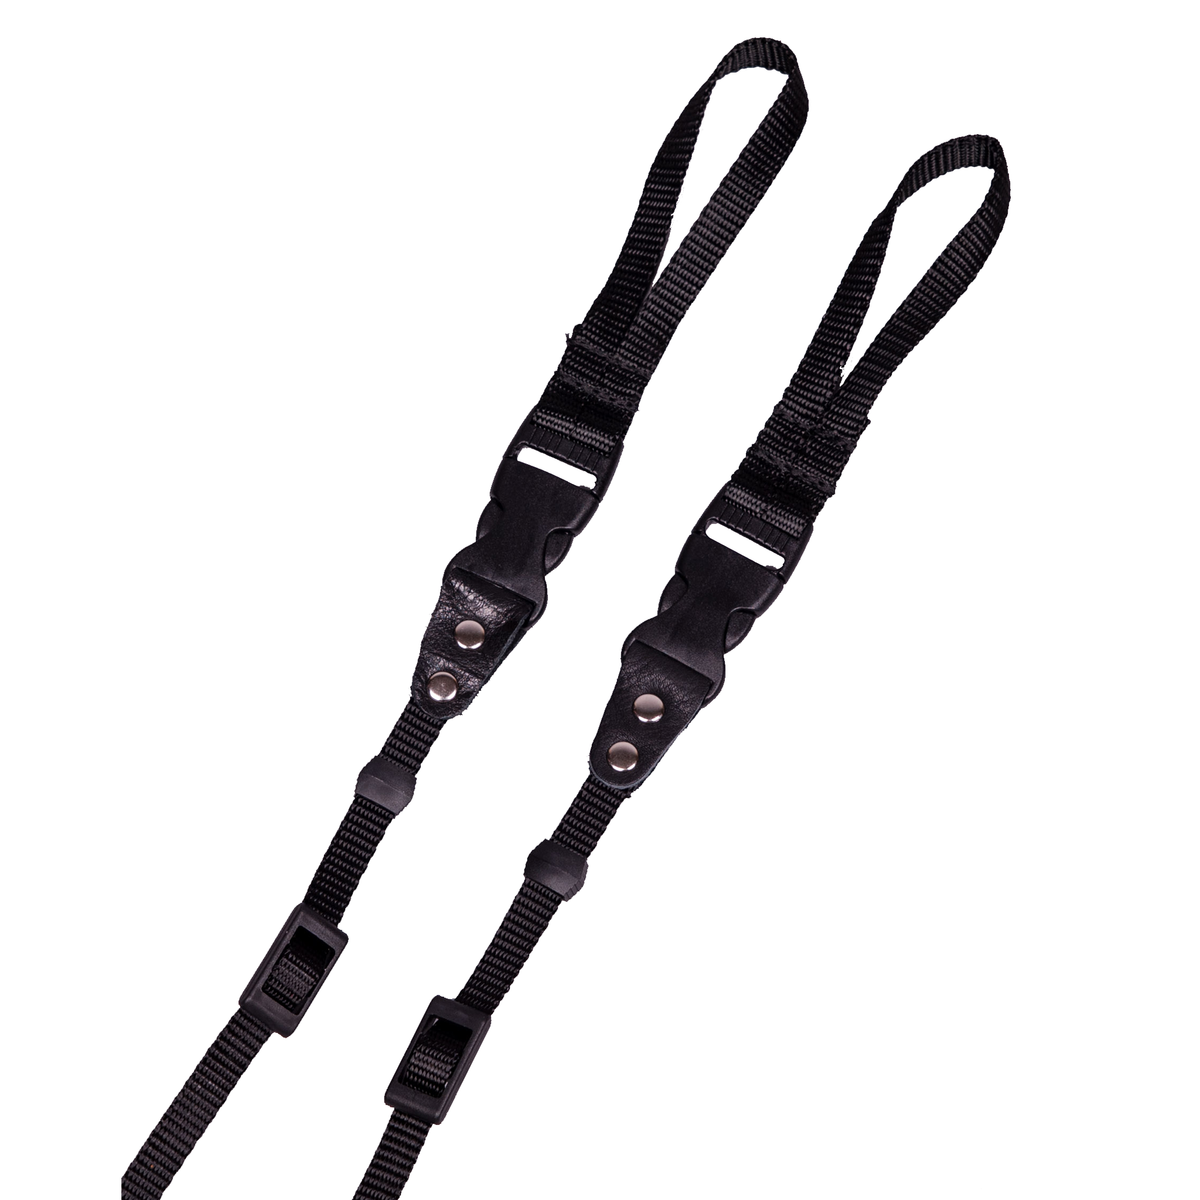 My Fave Backpack Camera Straps and binocular straps